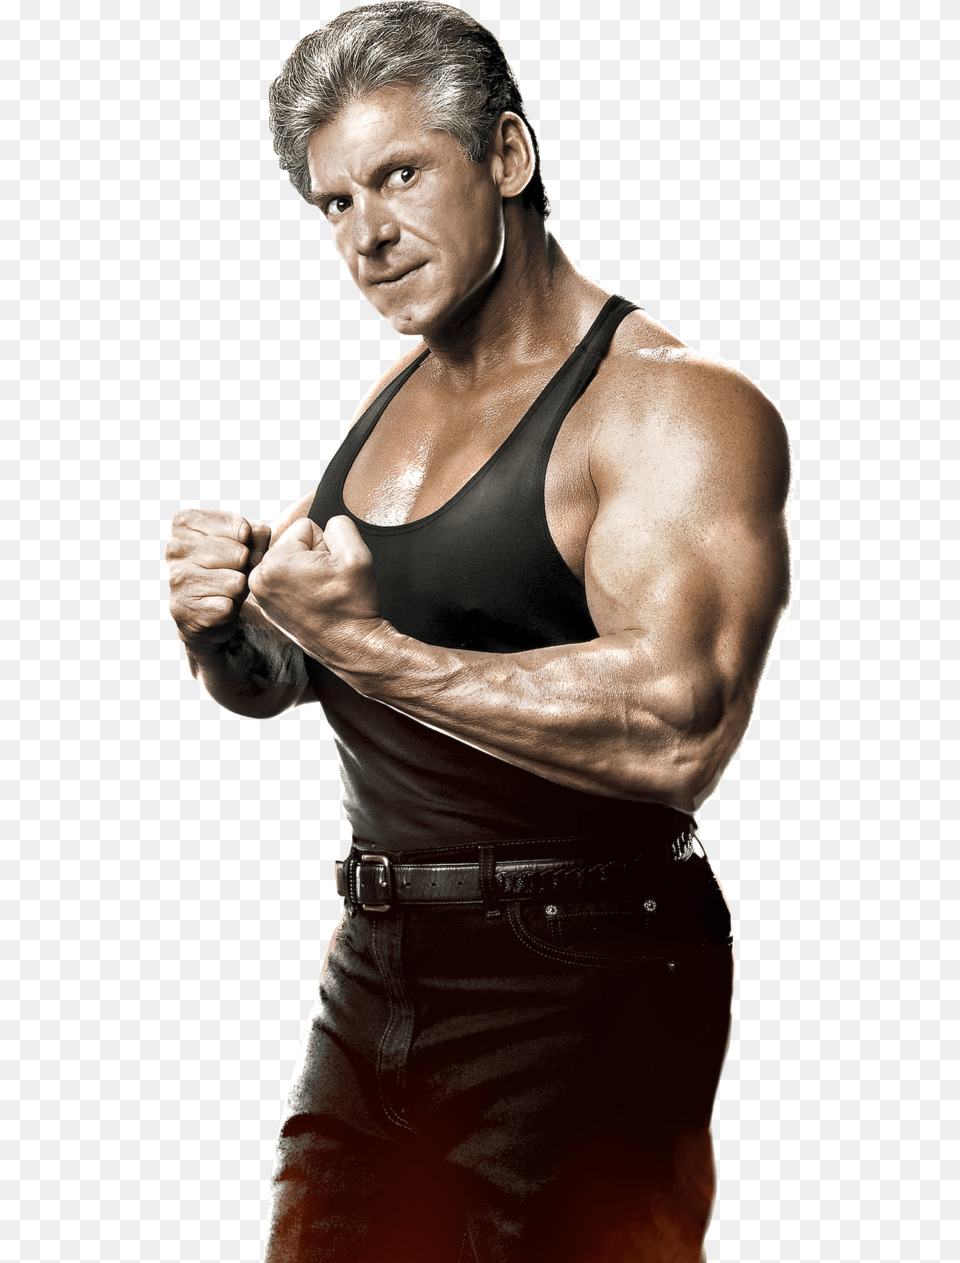 Wwe 2k14 Vince Mcmahon Render Cutout By Thexrealxbanks Wwe Vince Mcmahon, Person, Body Part, Finger, Hand Png